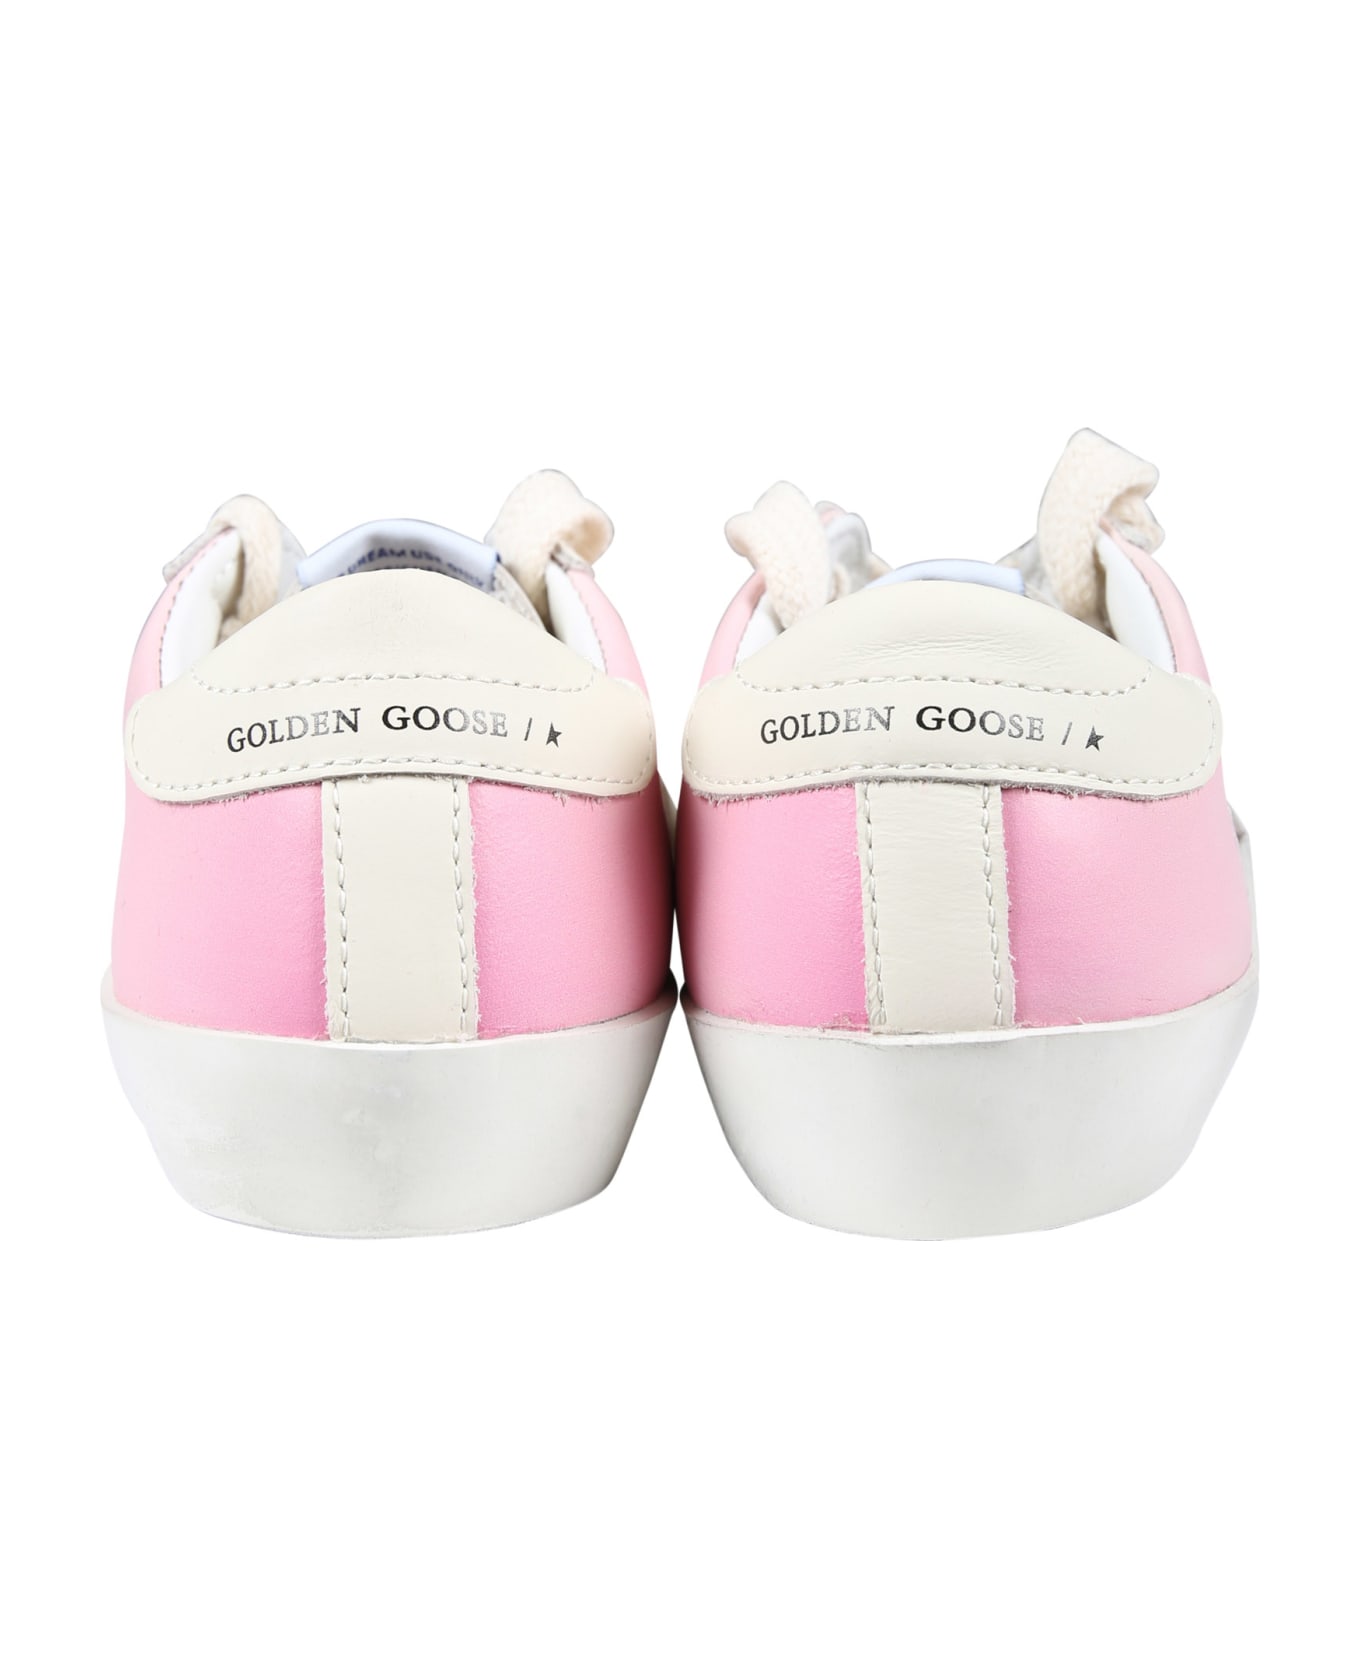 Bonpoint Pink Sneakers For Girl With Star - Pink シューズ